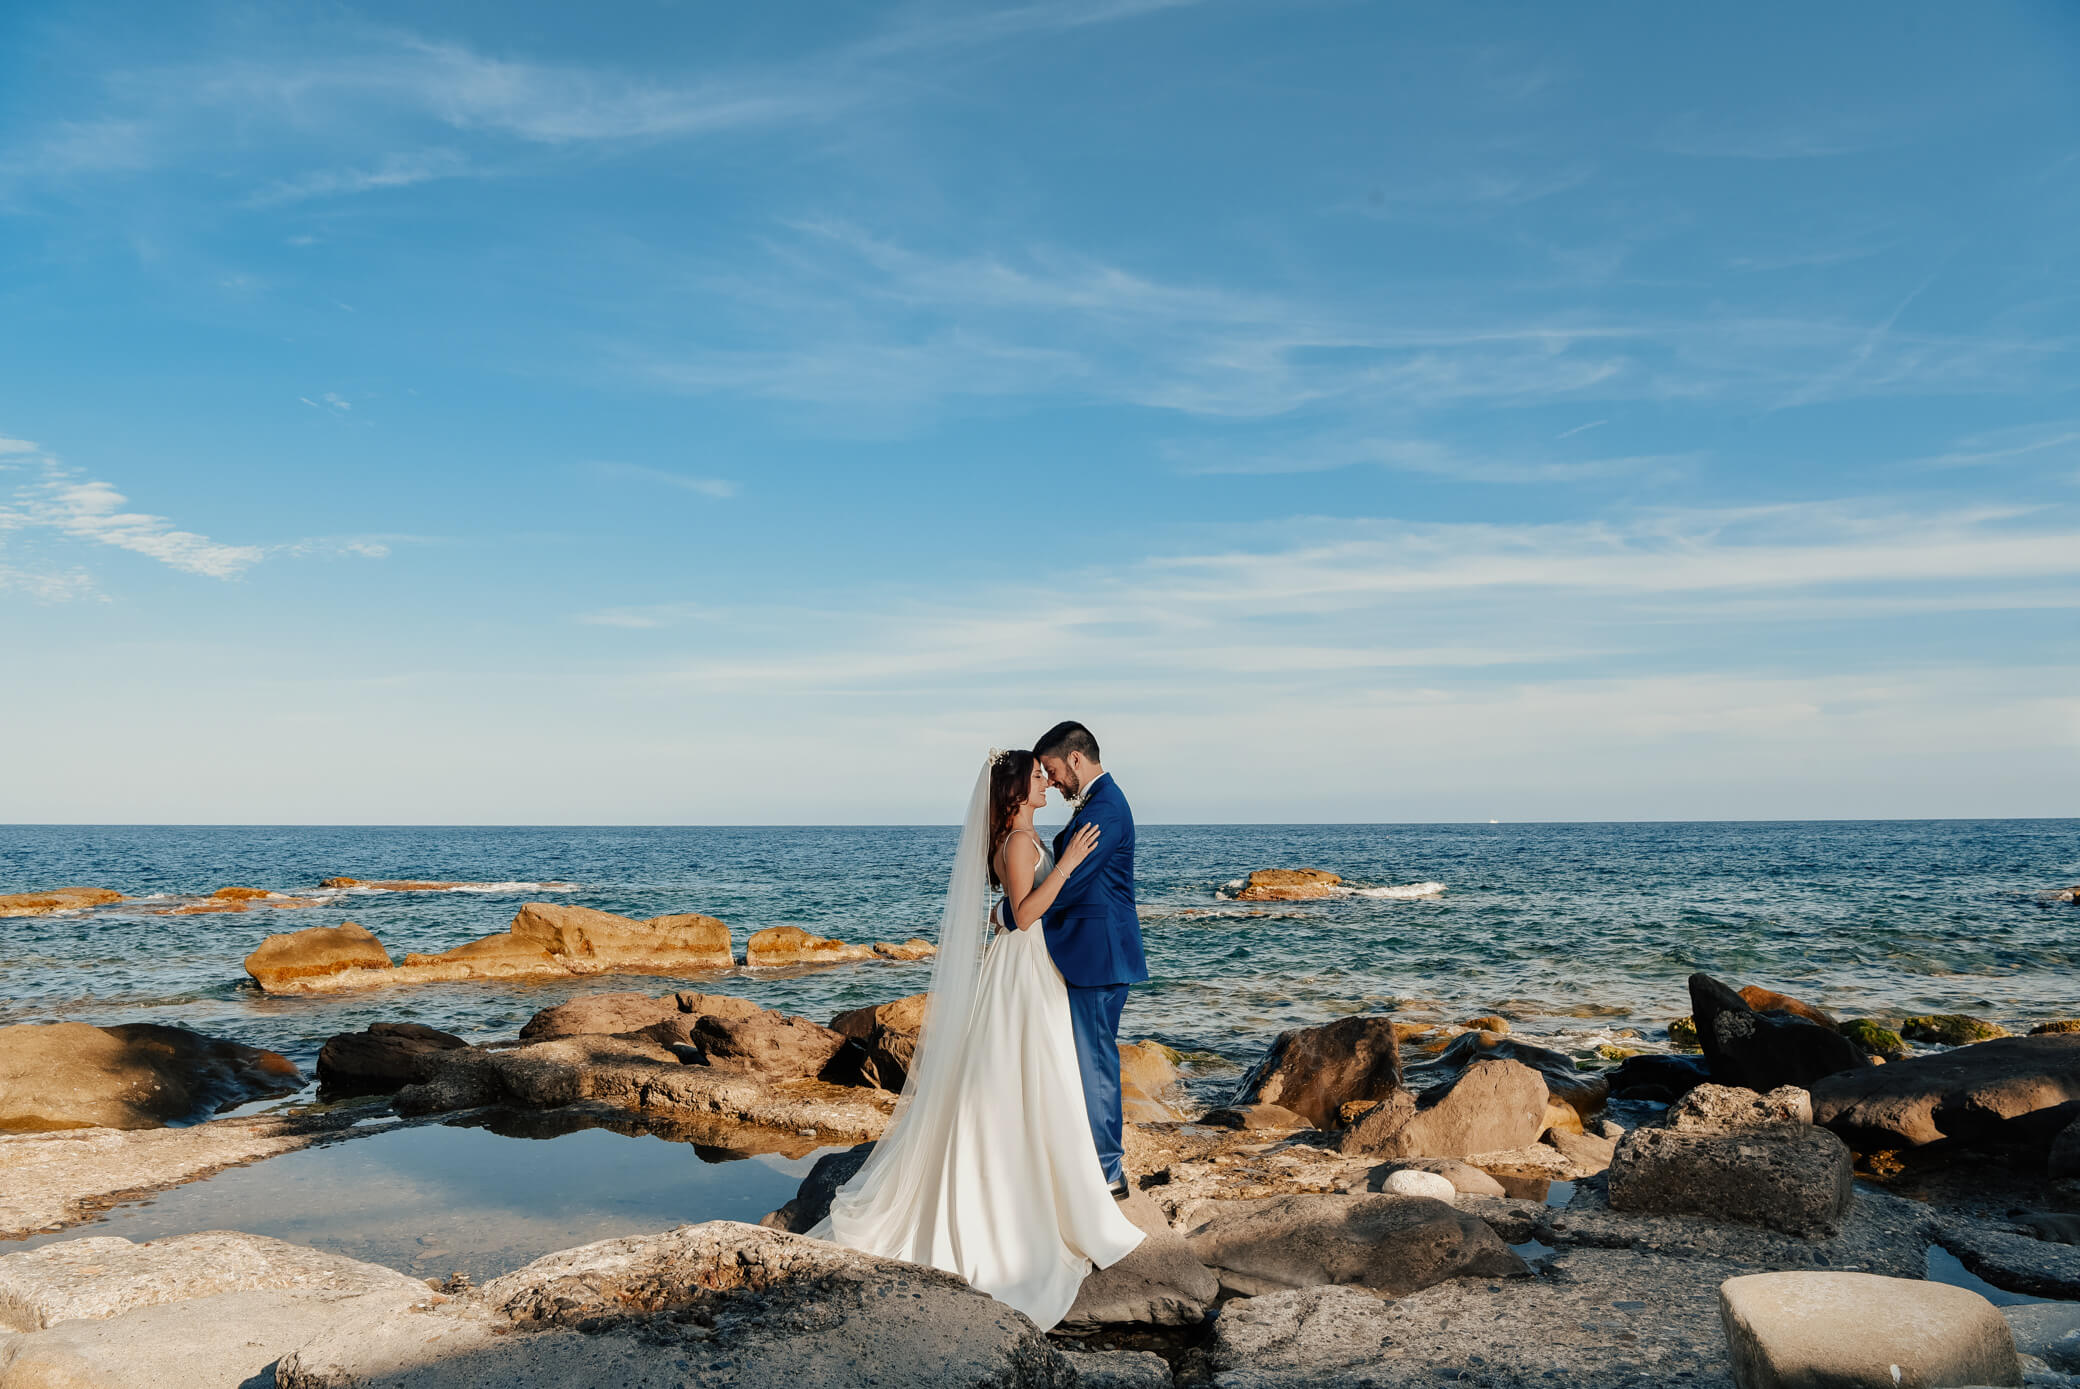 destination wedding in Italy? the ideal place could be Liguria